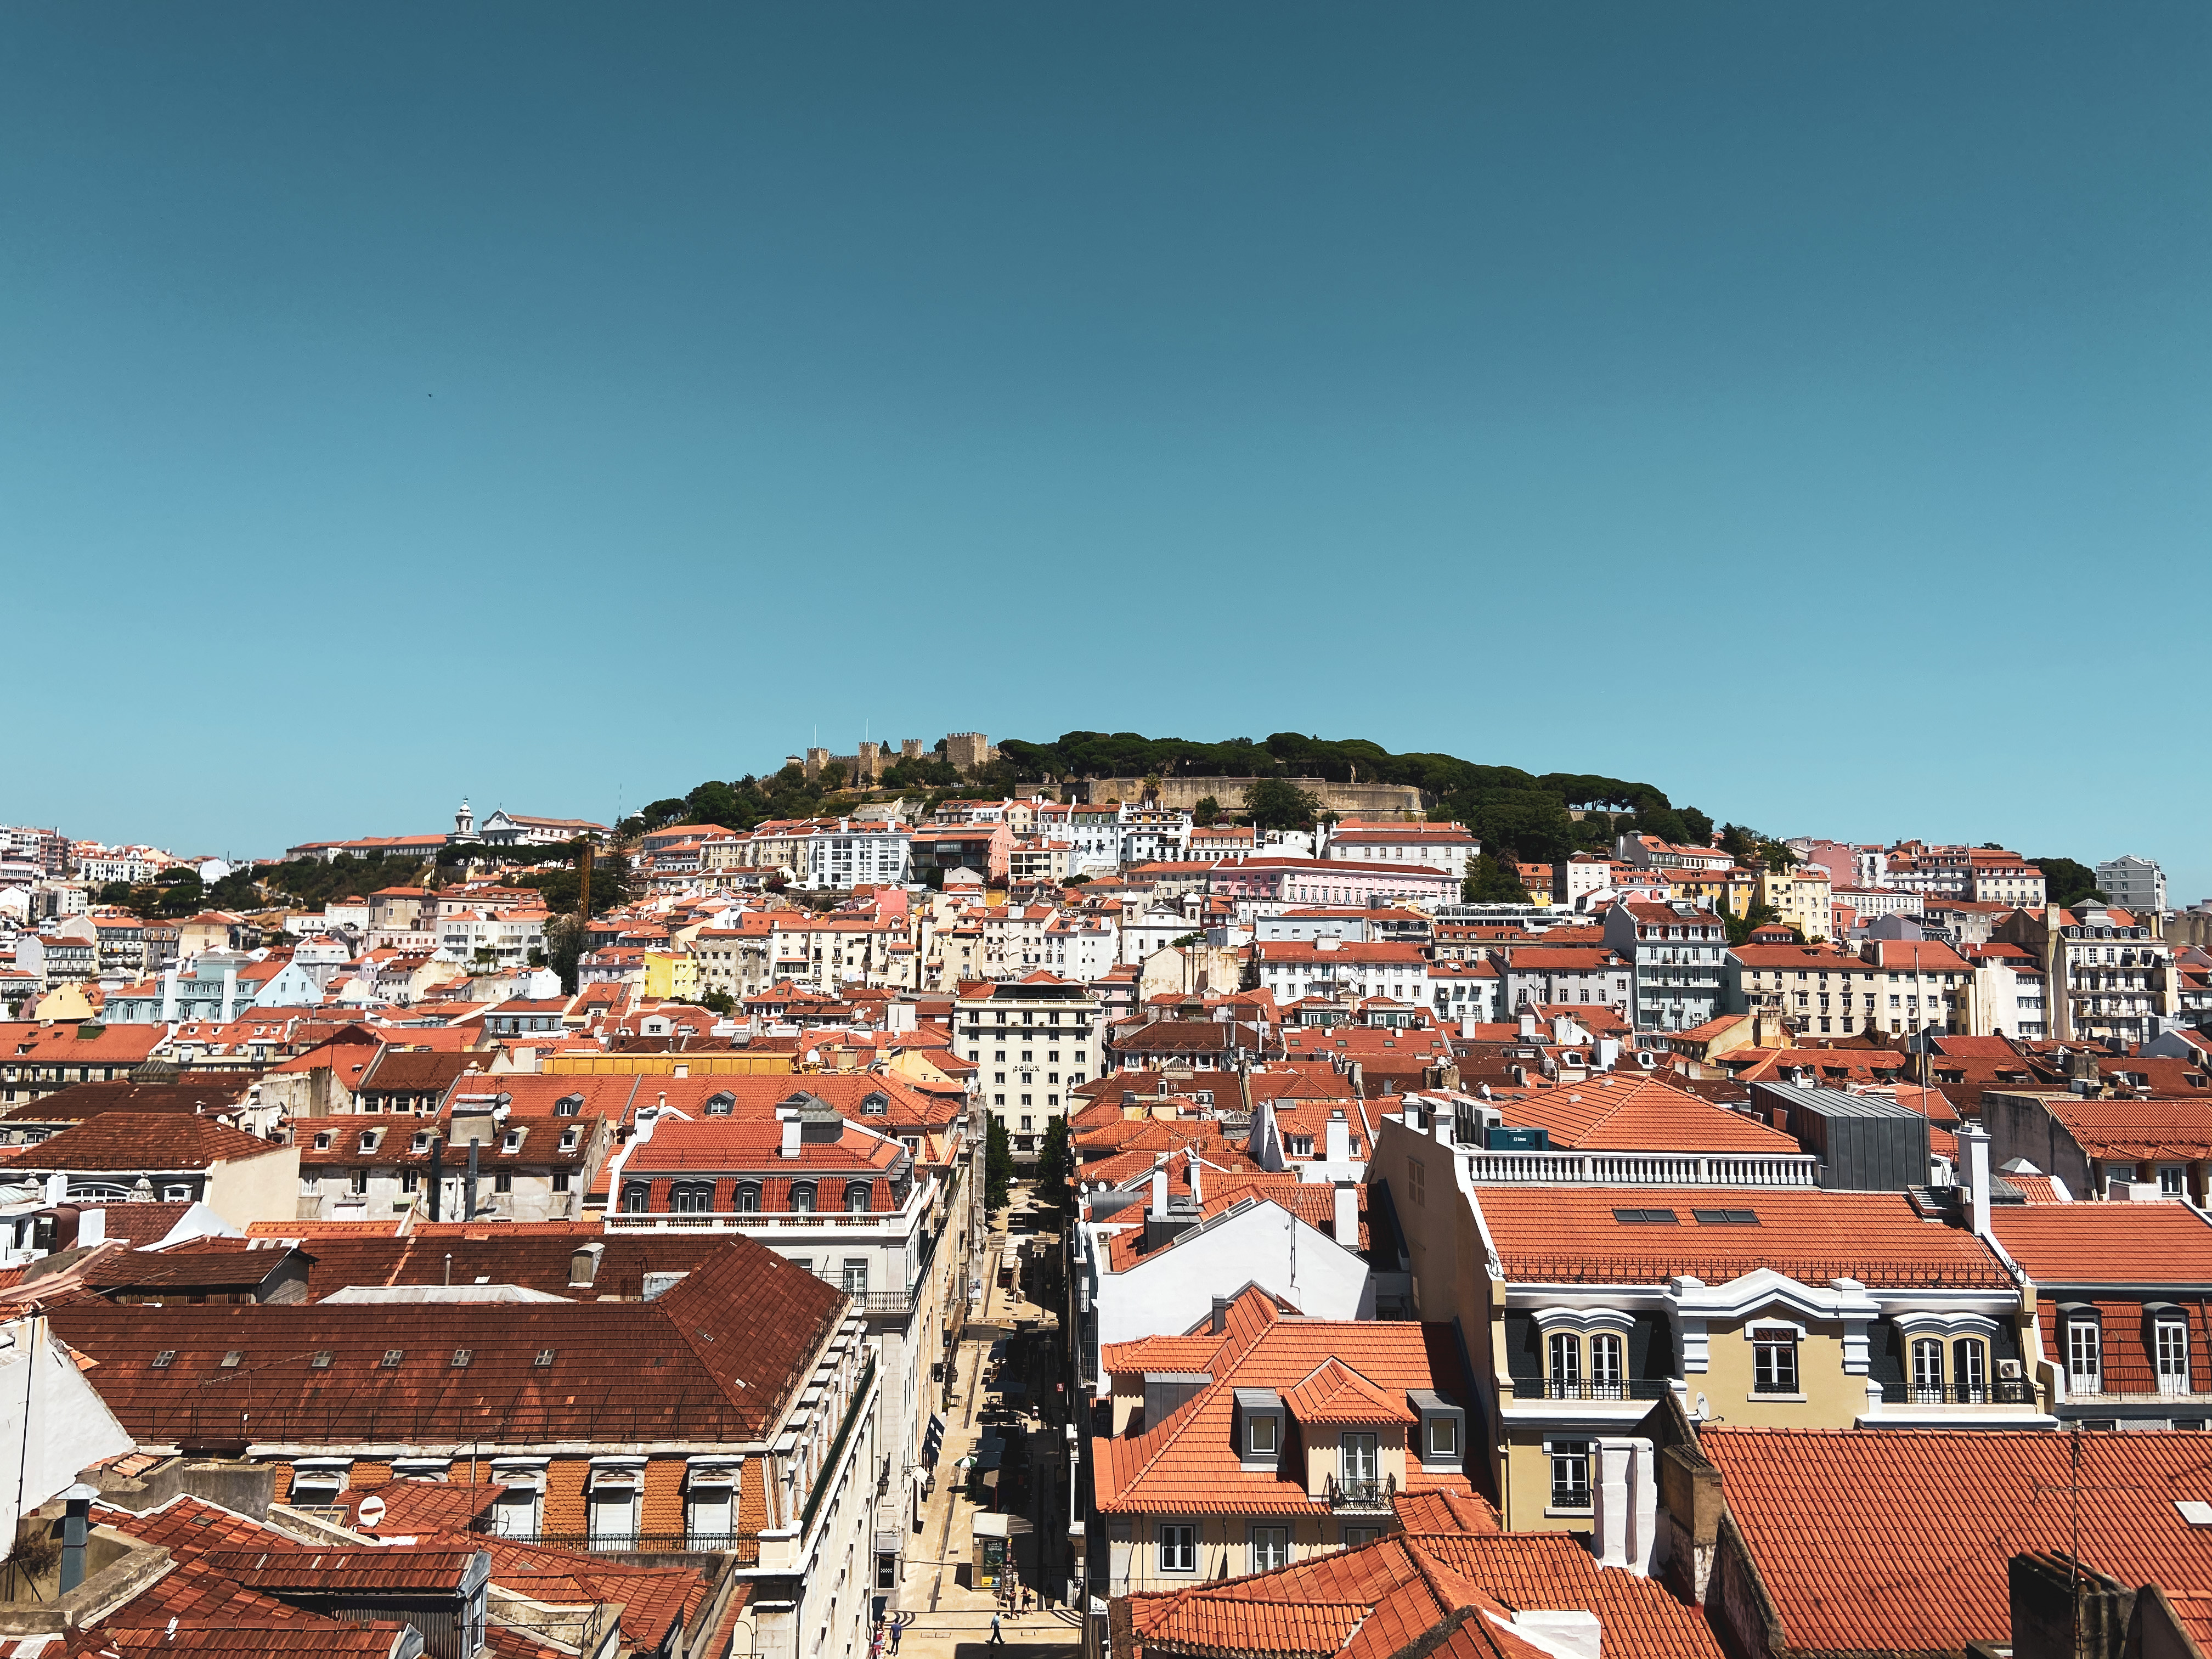 Travel during COVID 19. A view of Lisbon under a blue sky